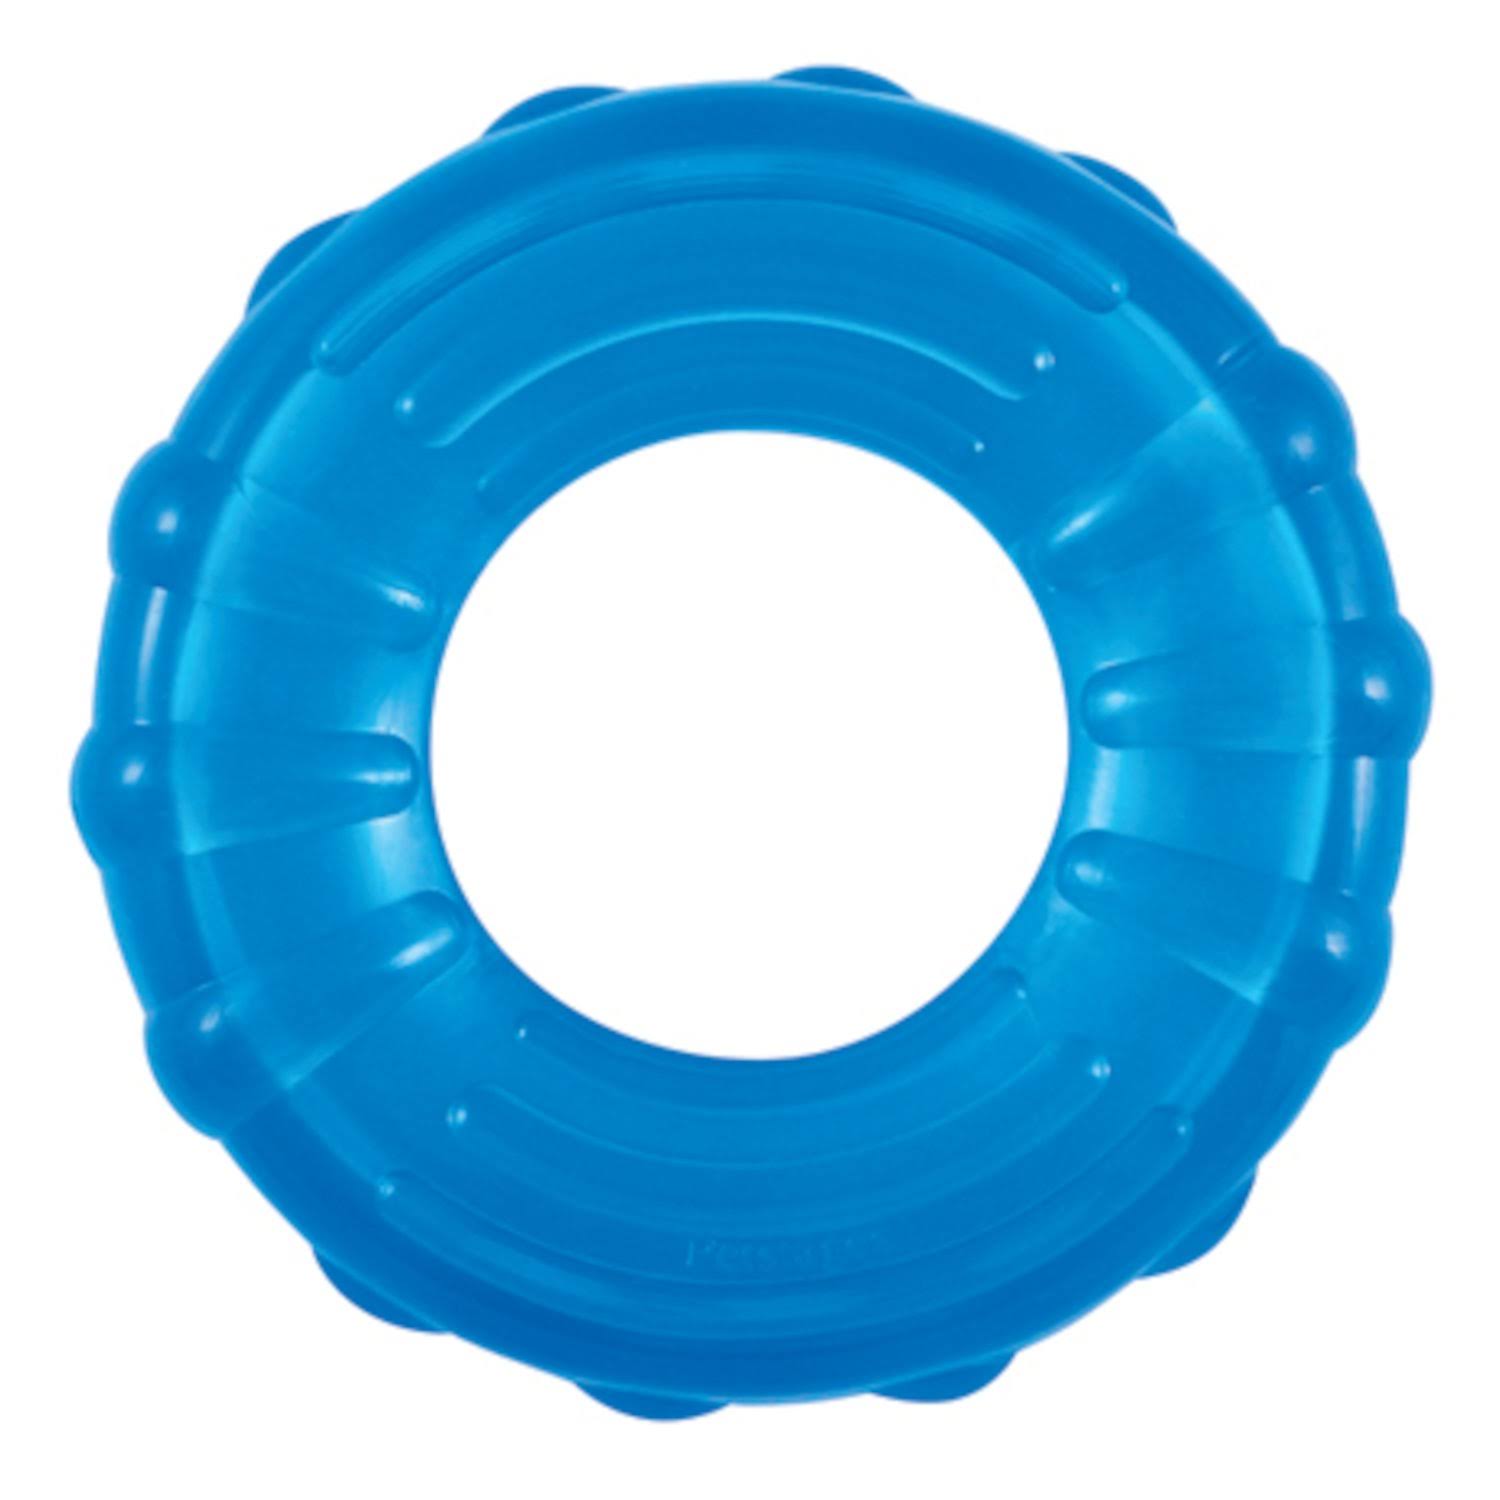 Petstages Orka Tire - Blue